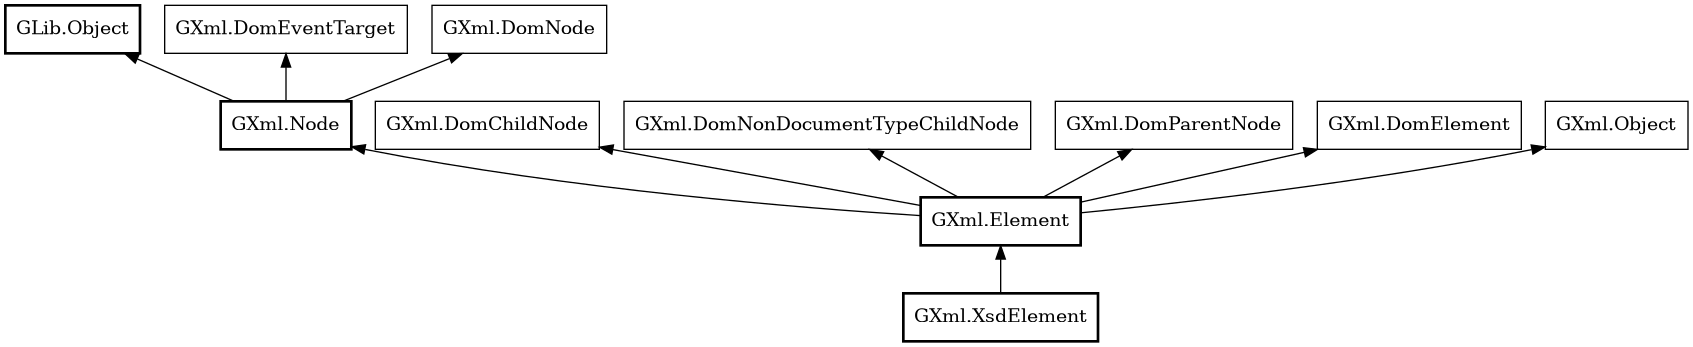 Object hierarchy for XsdElement